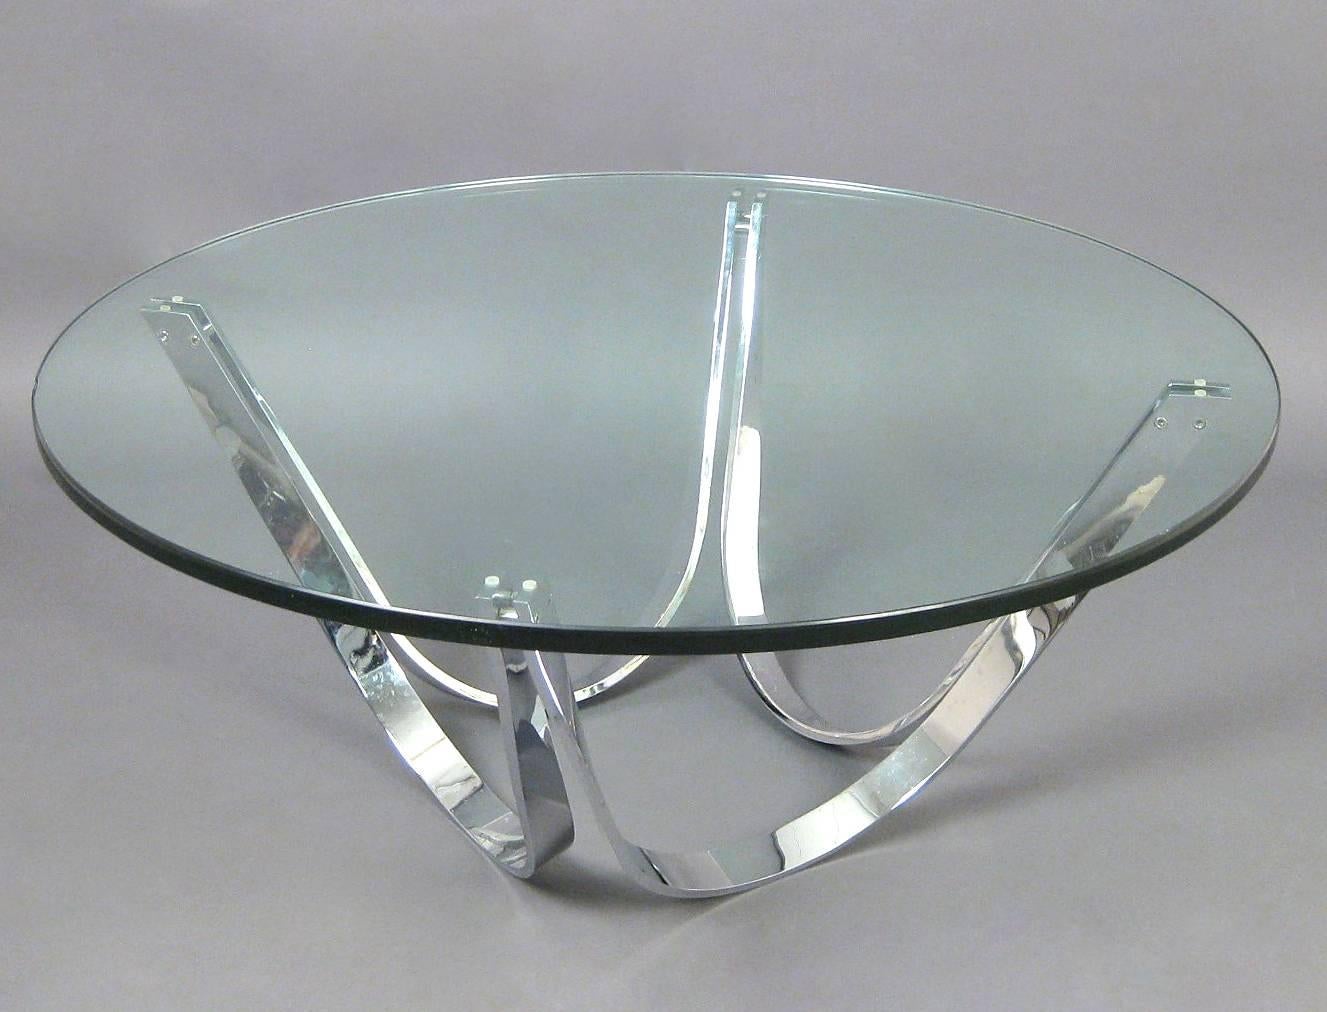 Mid-Century Modern Chrome and Glass Coffee Table Produced by Tri-Mark Designs